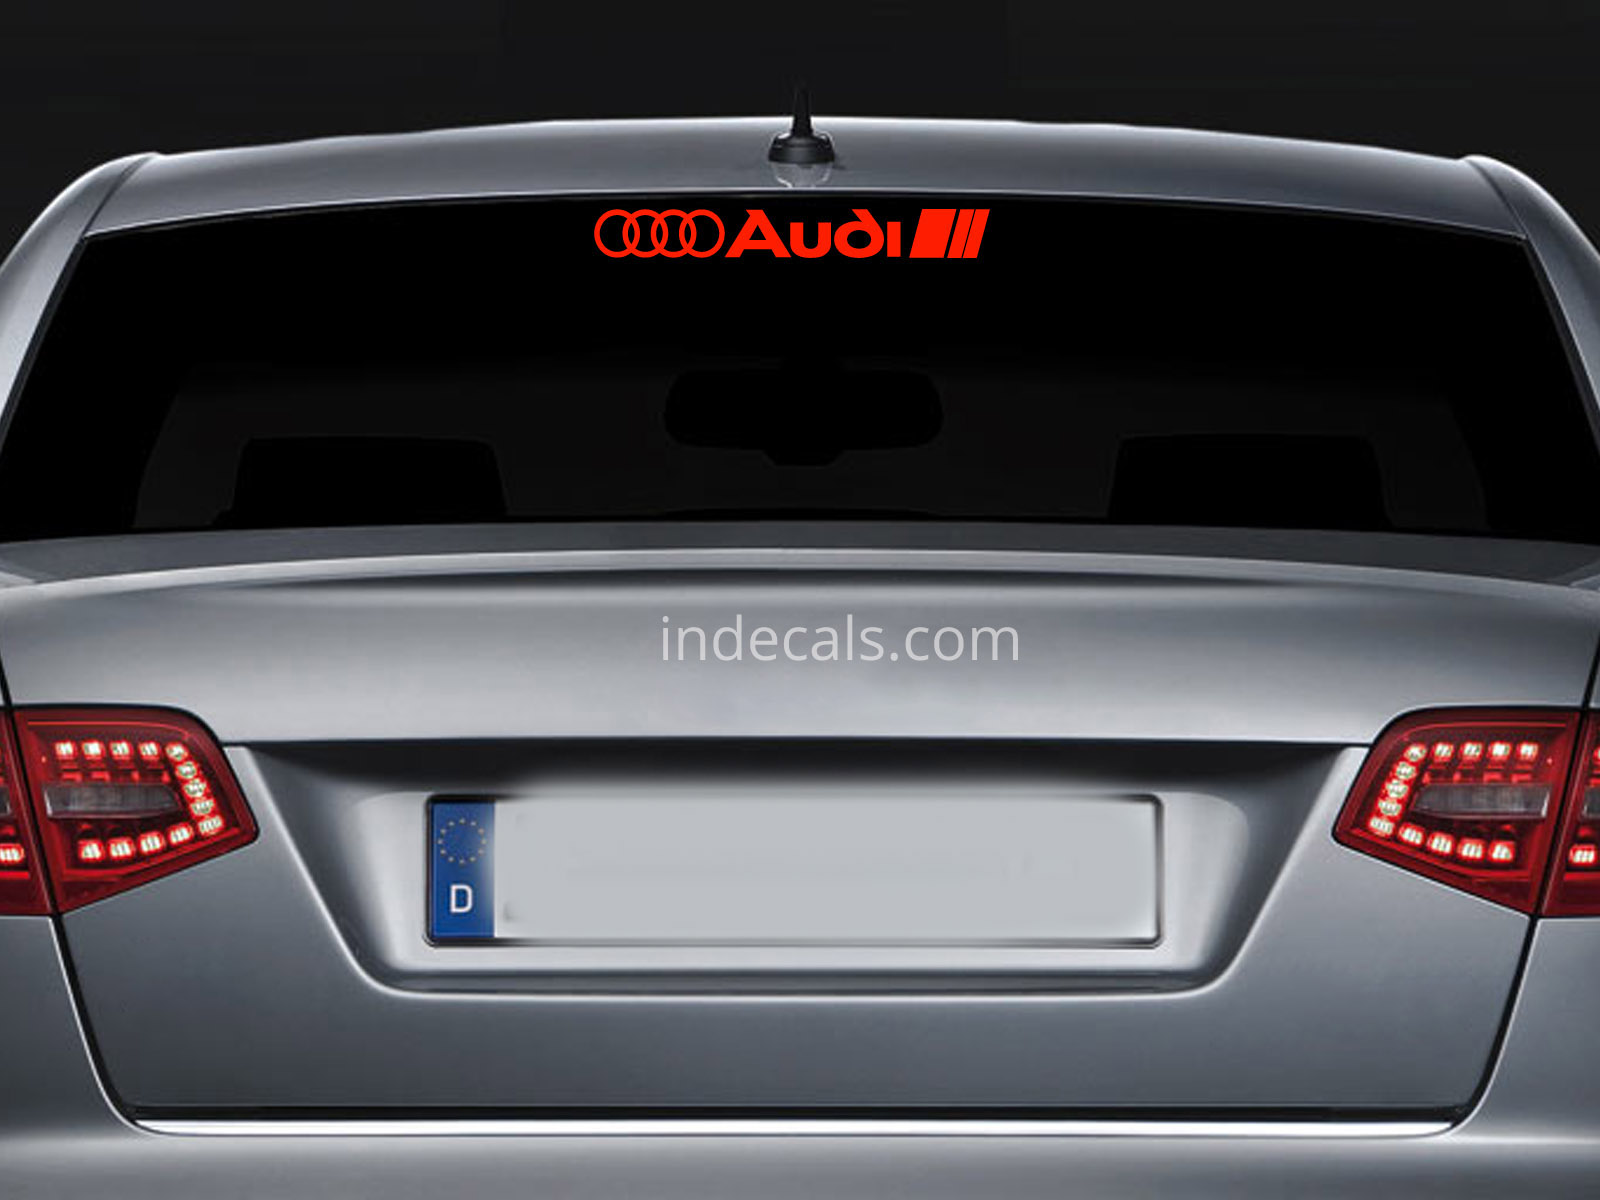 1 x Audi Sticker for Windshield or Back Window - Red